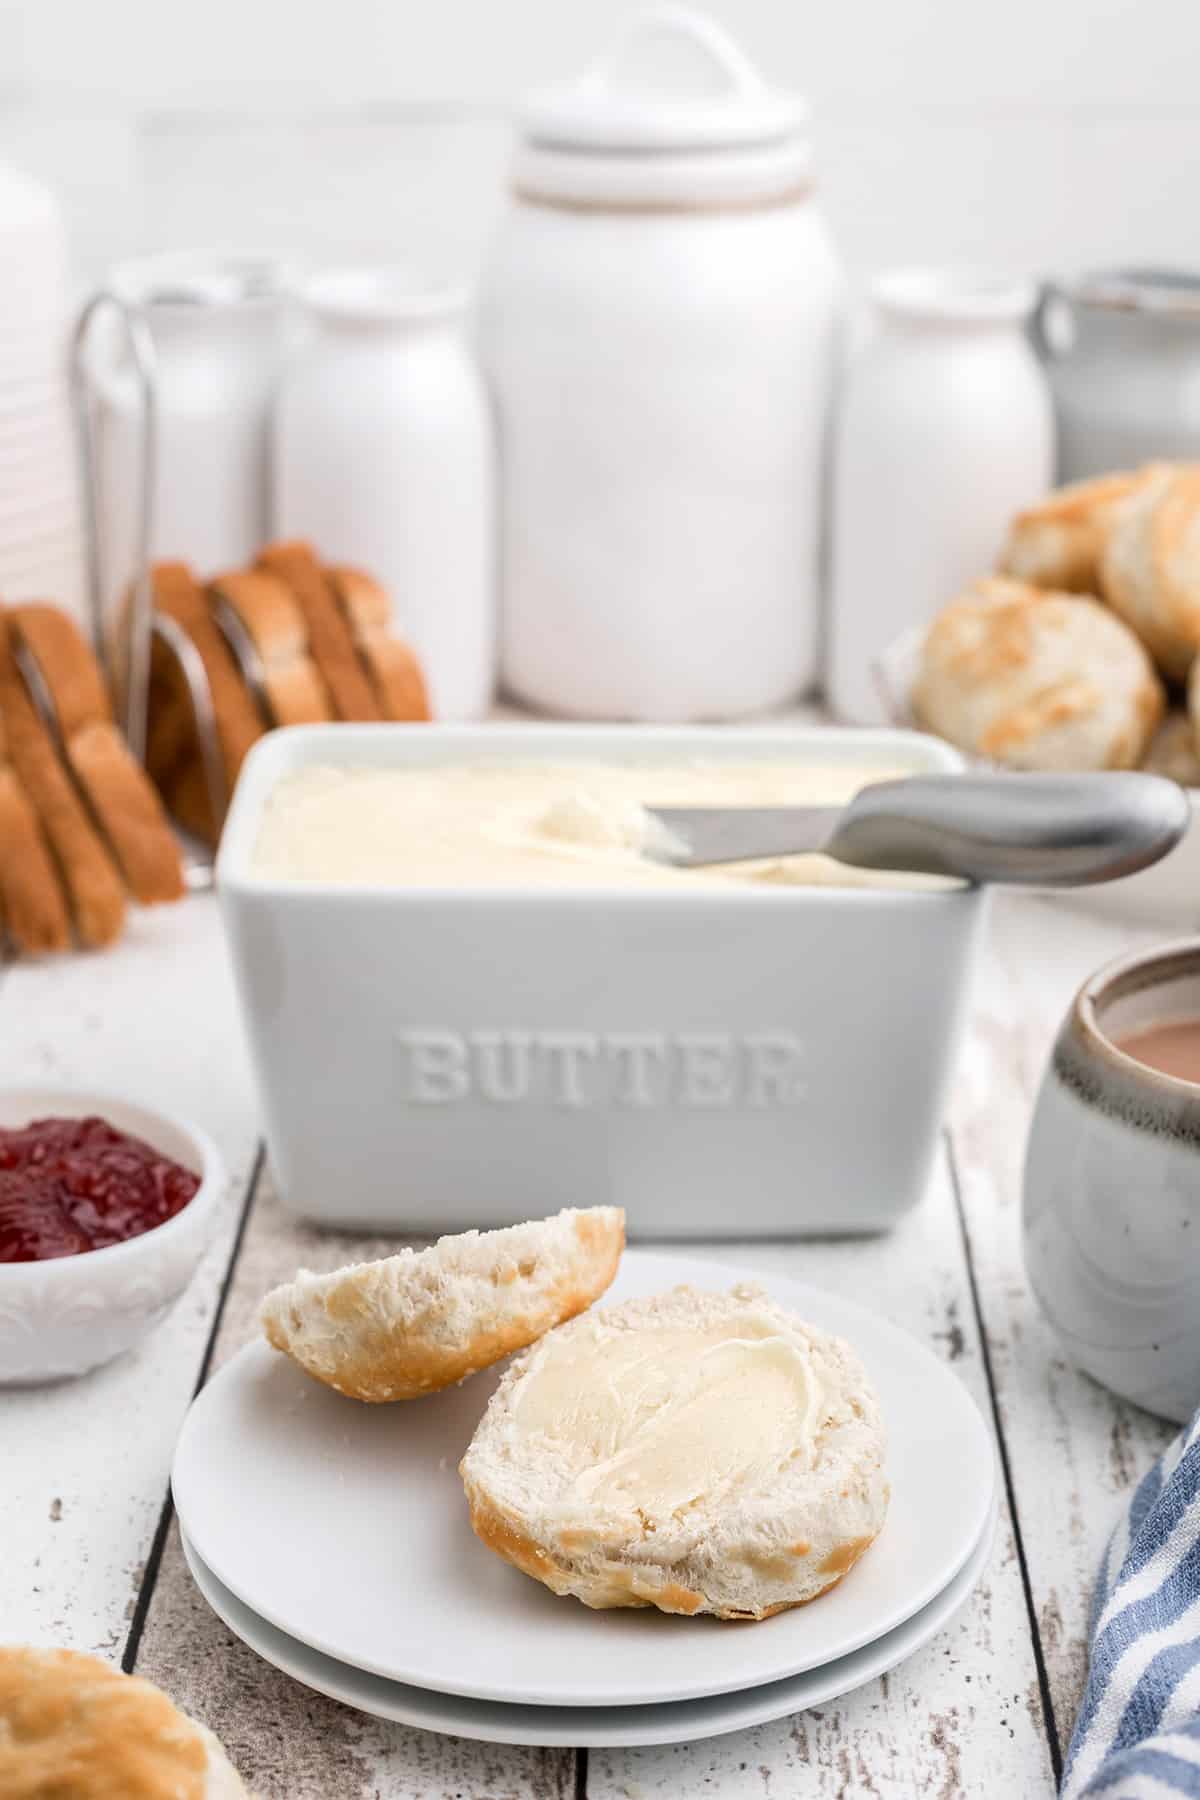 A container of homemade butter.